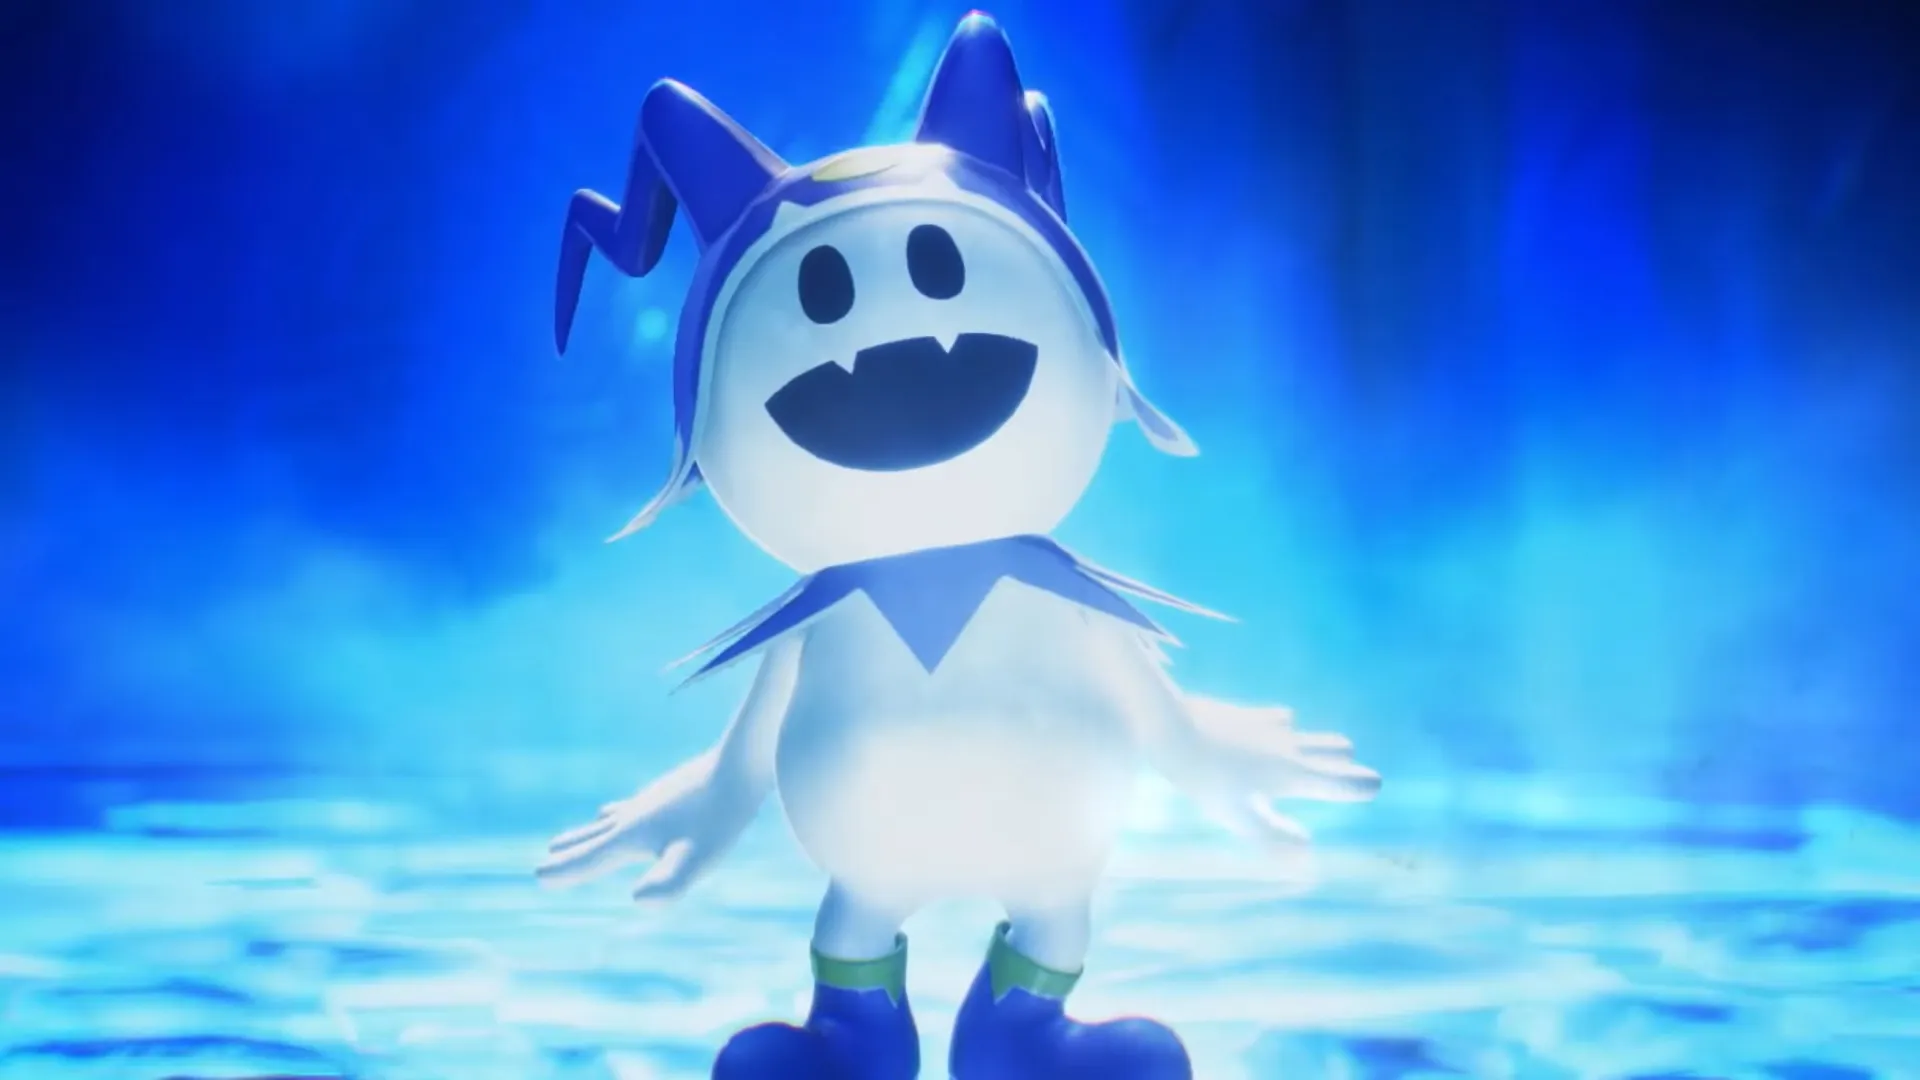 SMT V Version of Jack Frost Introduced in New Video Series - Siliconera